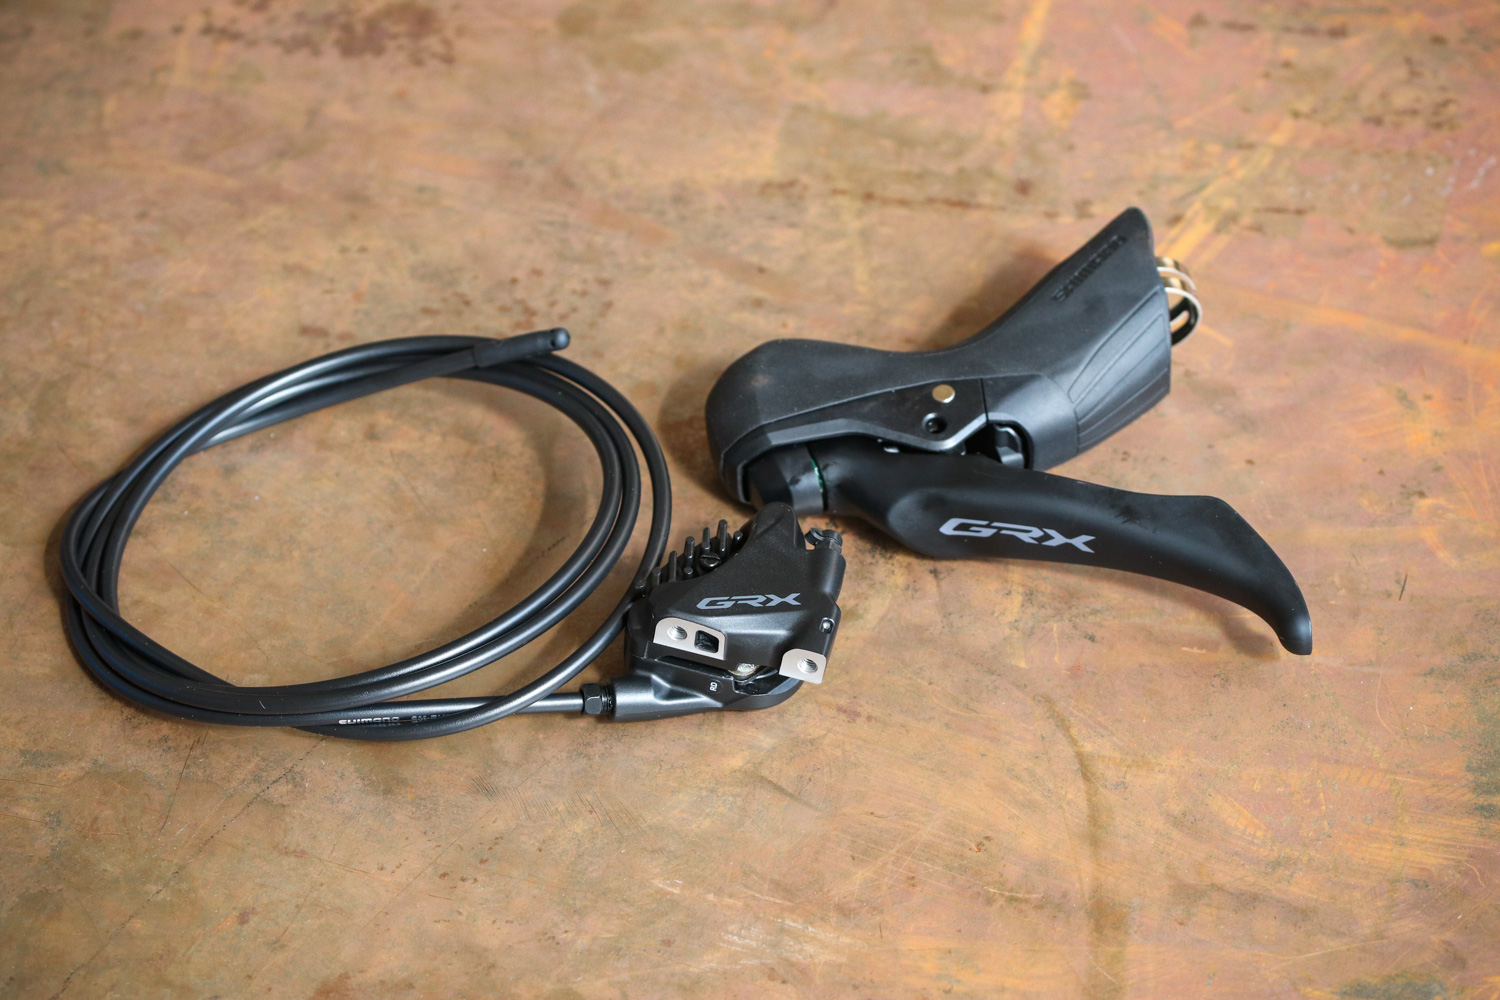 Review: Shimano GRX 600 groupset | road.cc